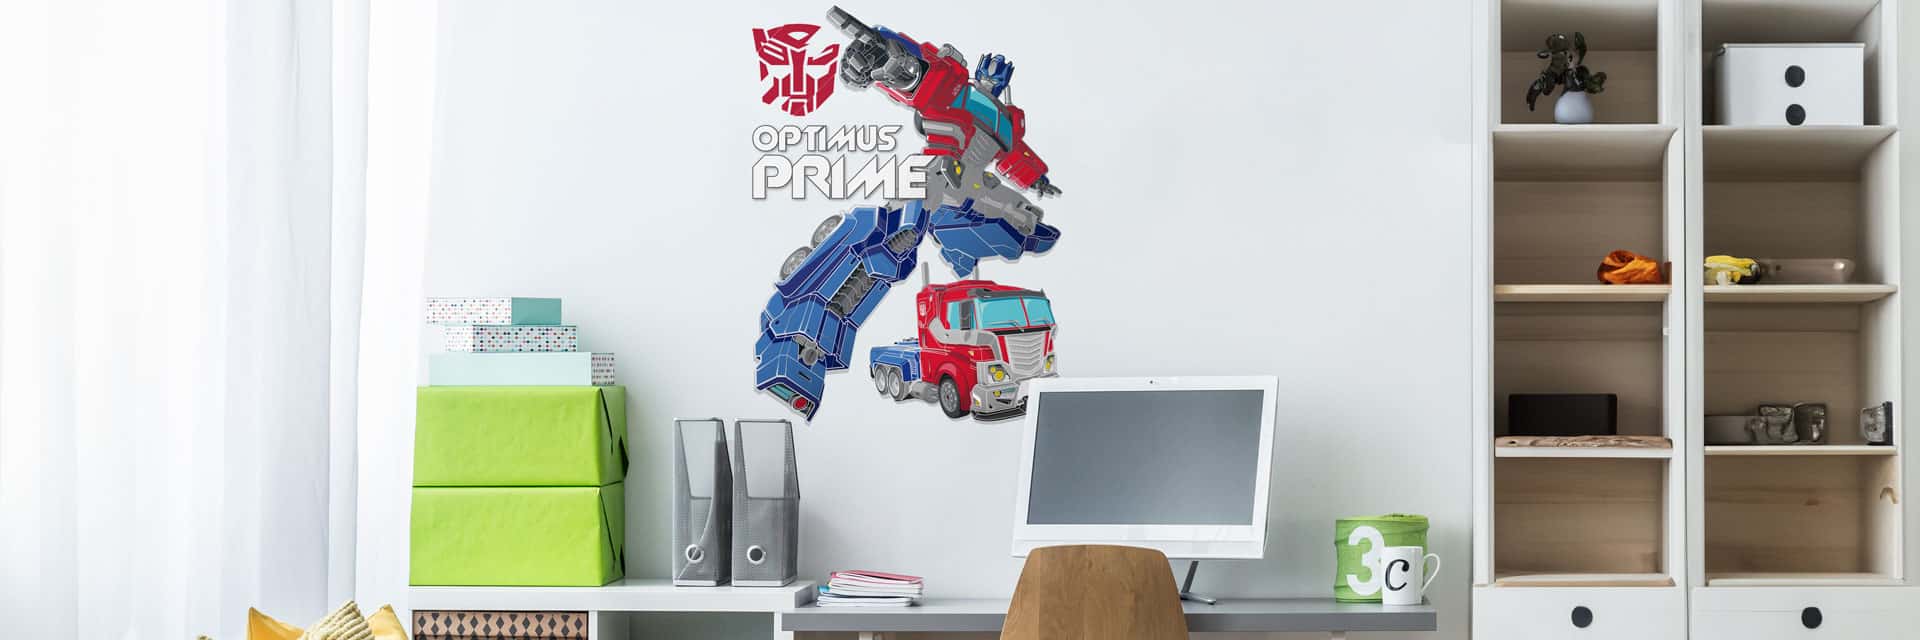 Official Transformers wall stickers above a boy's desk in a bedroom